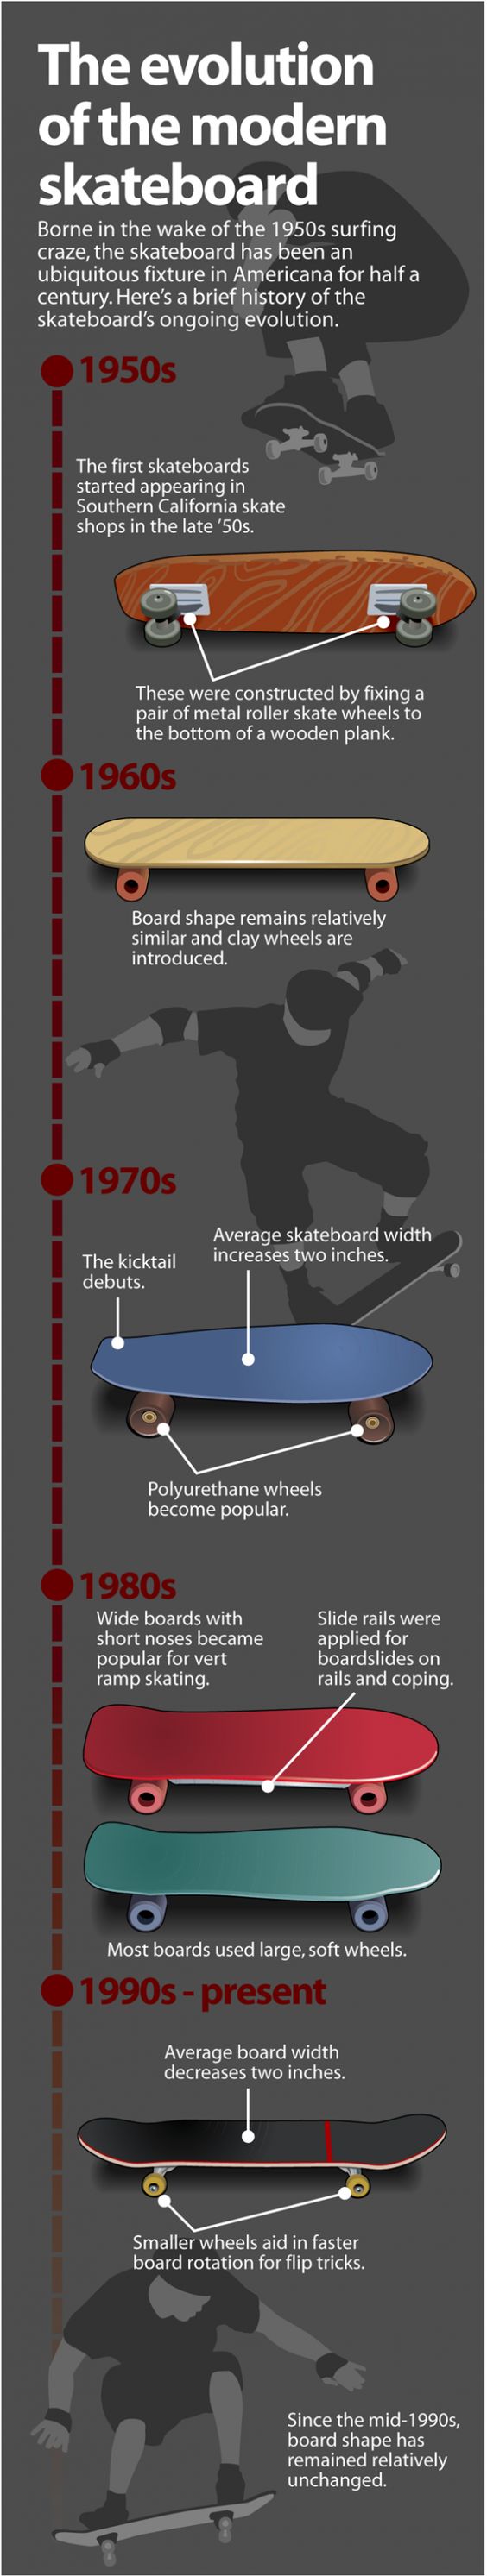 Evolution of the modern skateboard 2013- Lil Red Hen Skateboard Wheels develops the first functional mag wheel and tire combo with removable polyurethane 